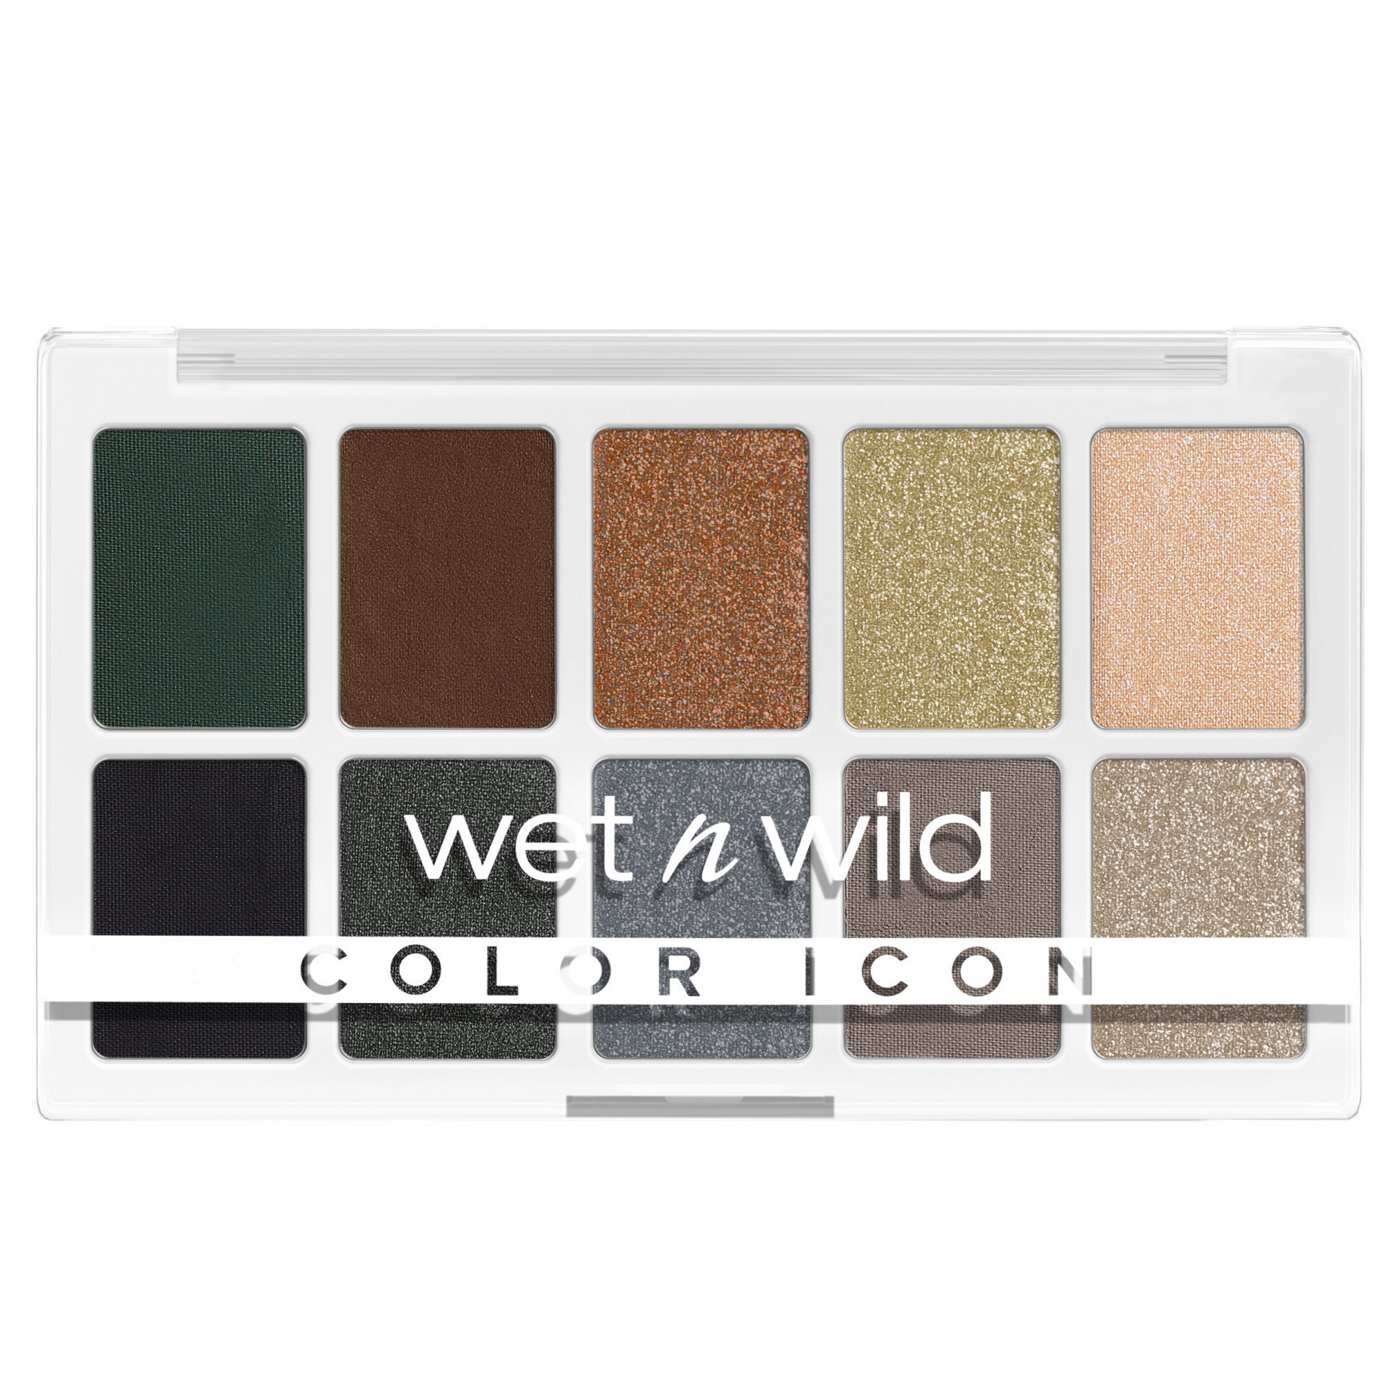 Wet n Wild Color Icon Eyeshadow Palette; image 1 of 2